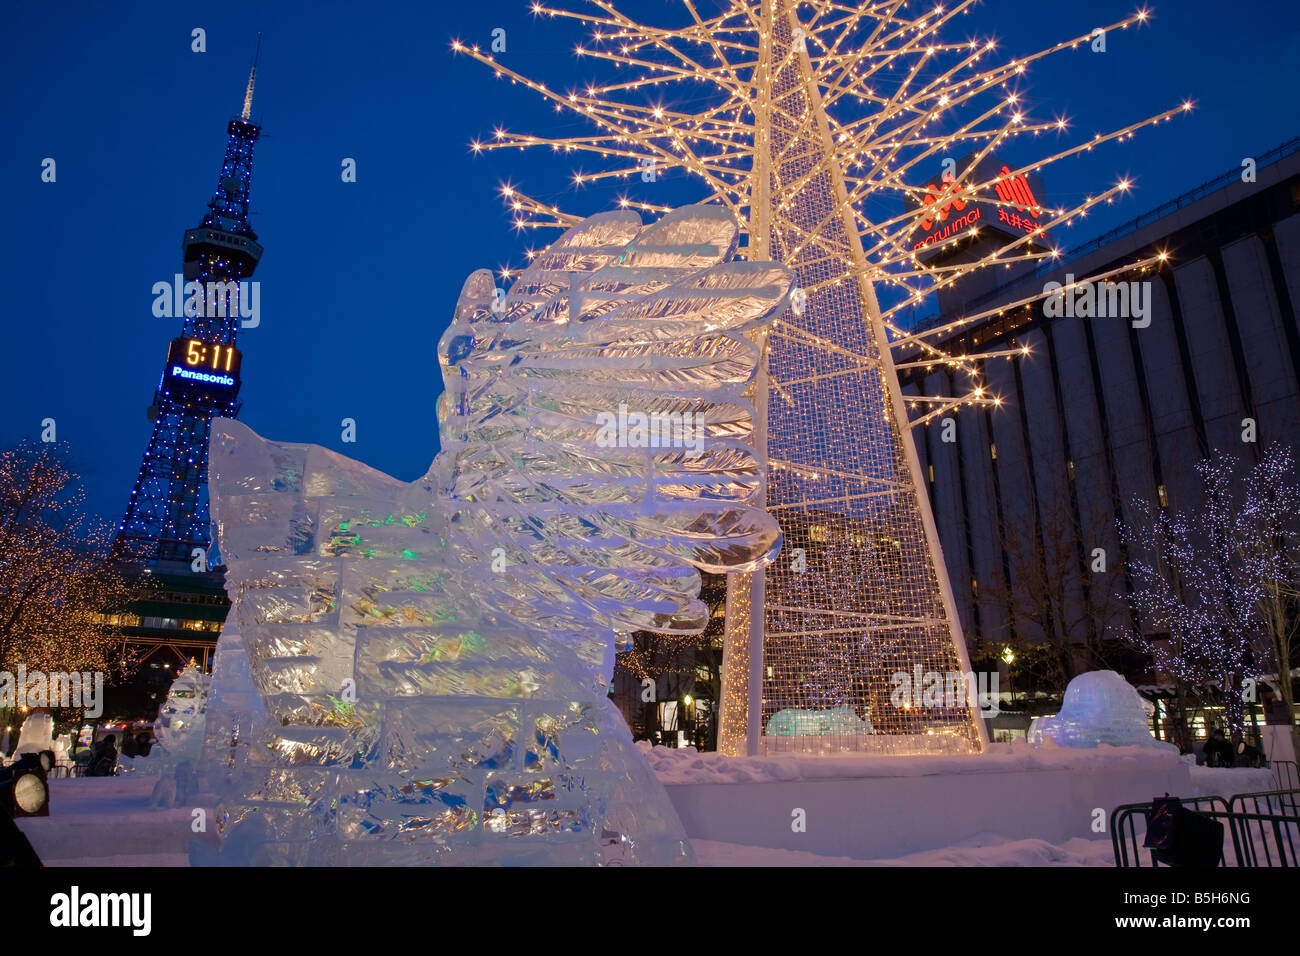 Sapporo Japan Sapporo TV Tower stands above the annual Snow Festival in Odori Park night scene with ice scupltures and lights Stock Photo